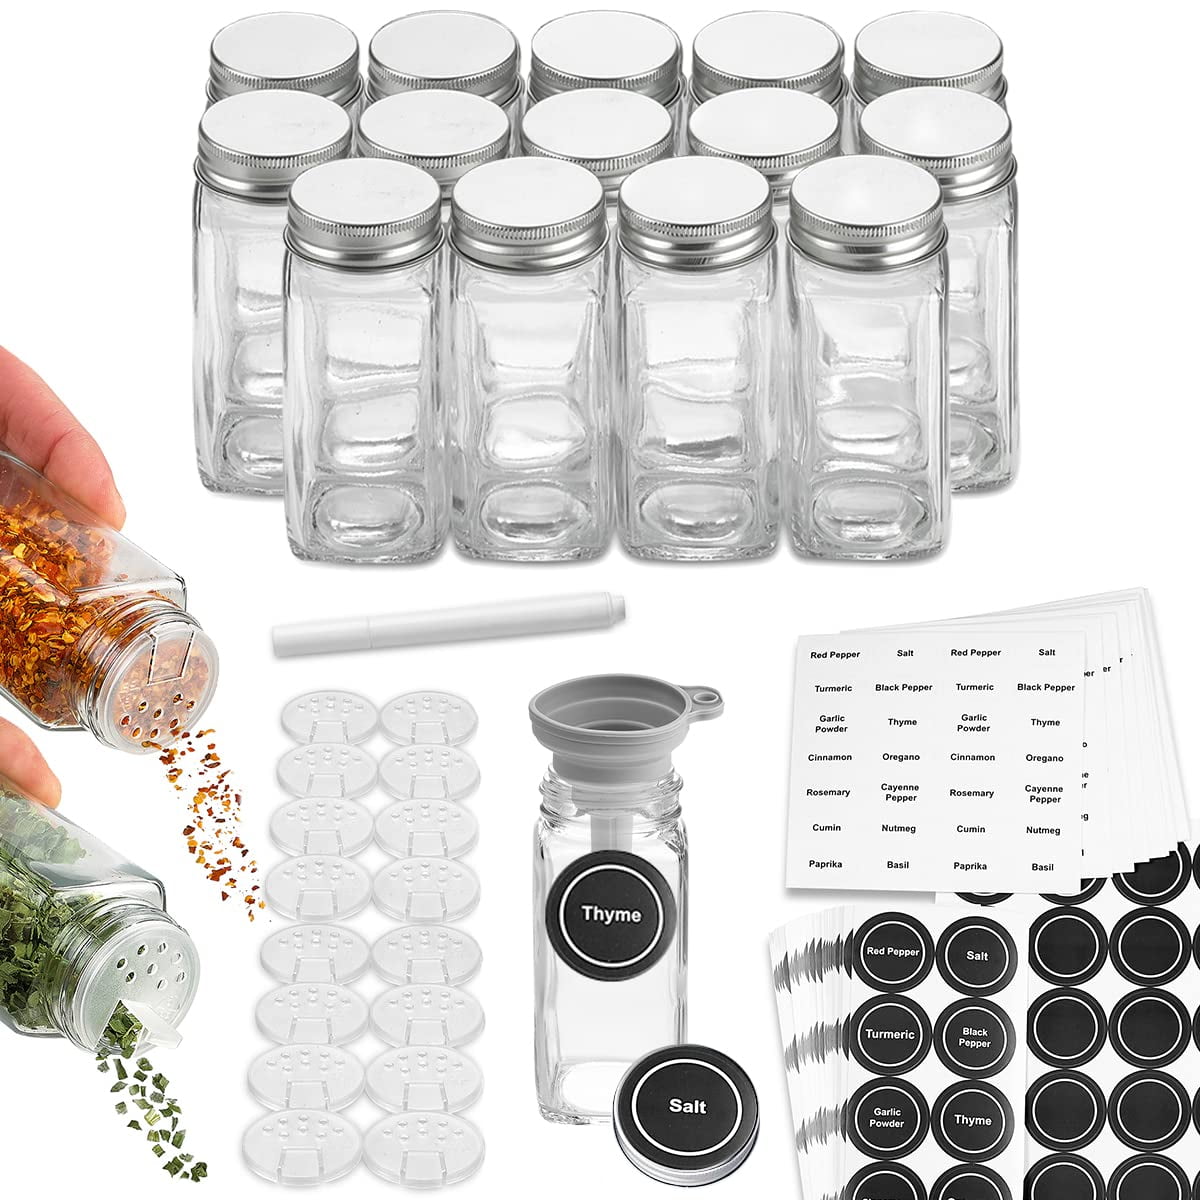 12 Pcs Glass Spice Jars/Bottles - 4oz Empty Square Spice Containers with  Blank Sticker and Airtight Metal Caps with Shaker Lids - AliExpress